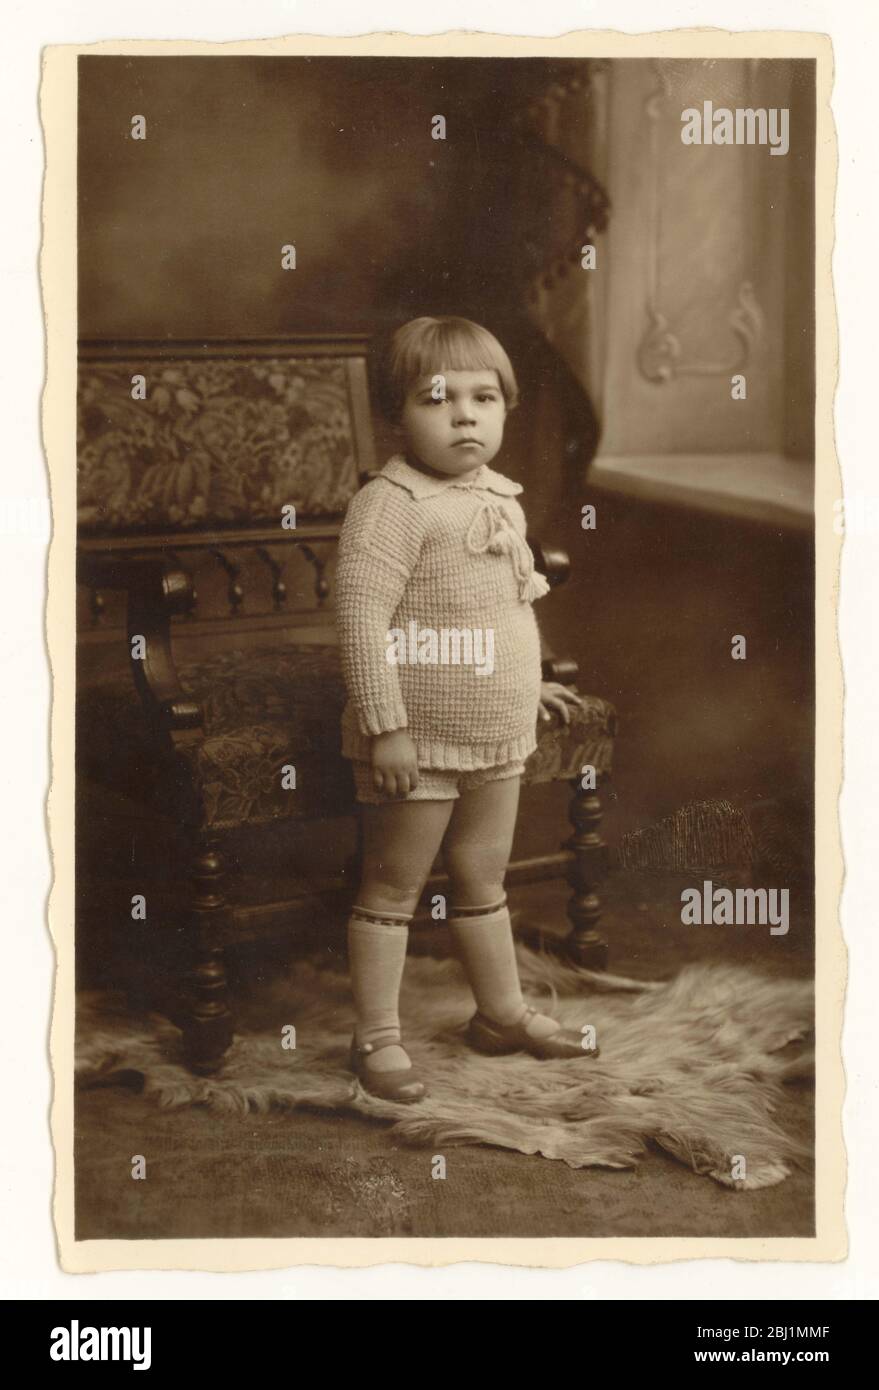 Early 1900's photo of serious looking boy aged 21/2 years old with a bob hair  cut fashionable at the time, circa 1925.  Stock Photo - Alamy